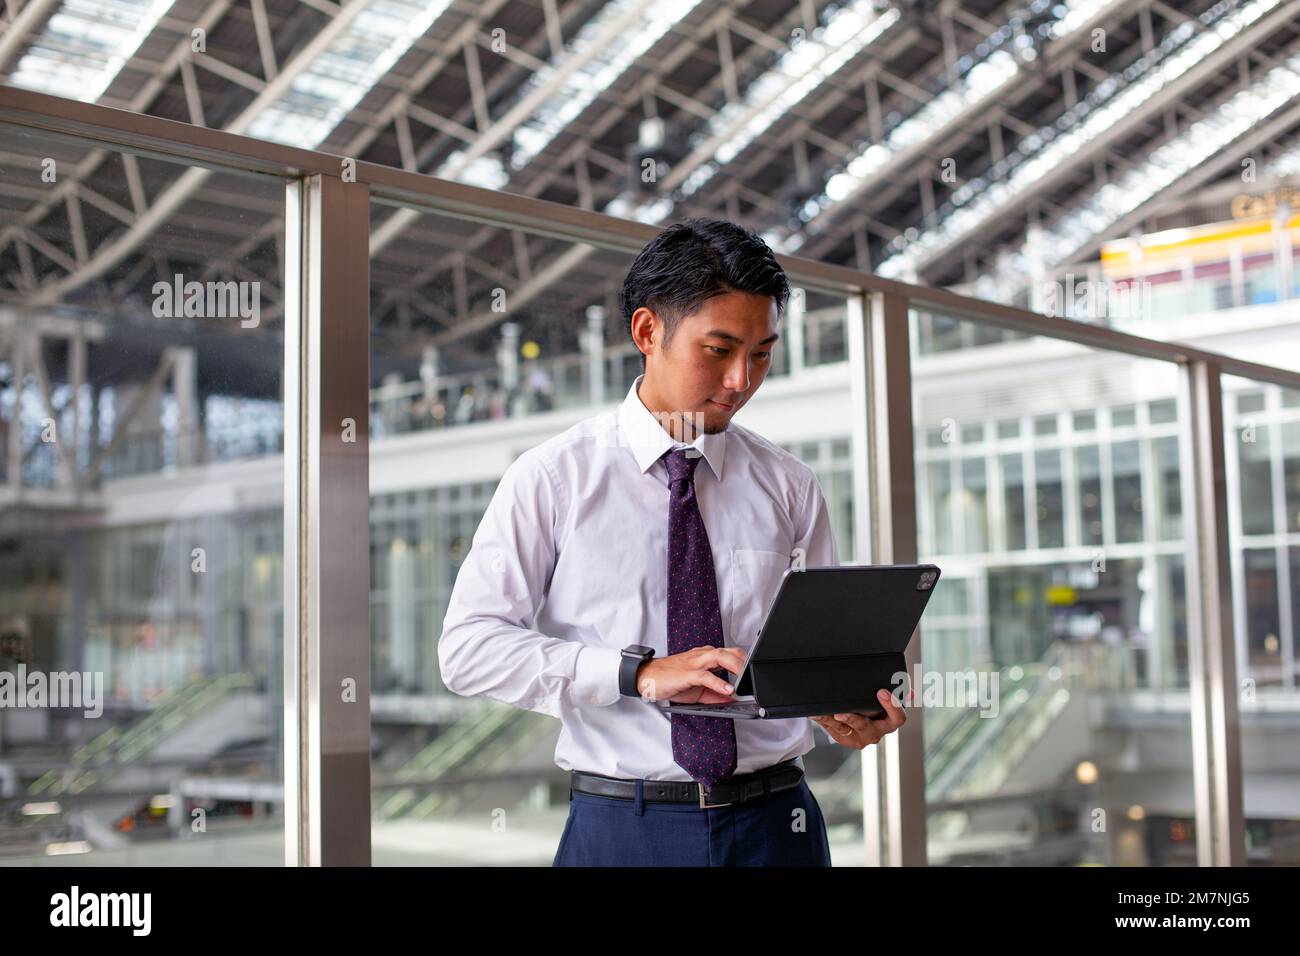 A young businessman in the city, on the move, standing on a walkway, using his laptop. Stock Photo